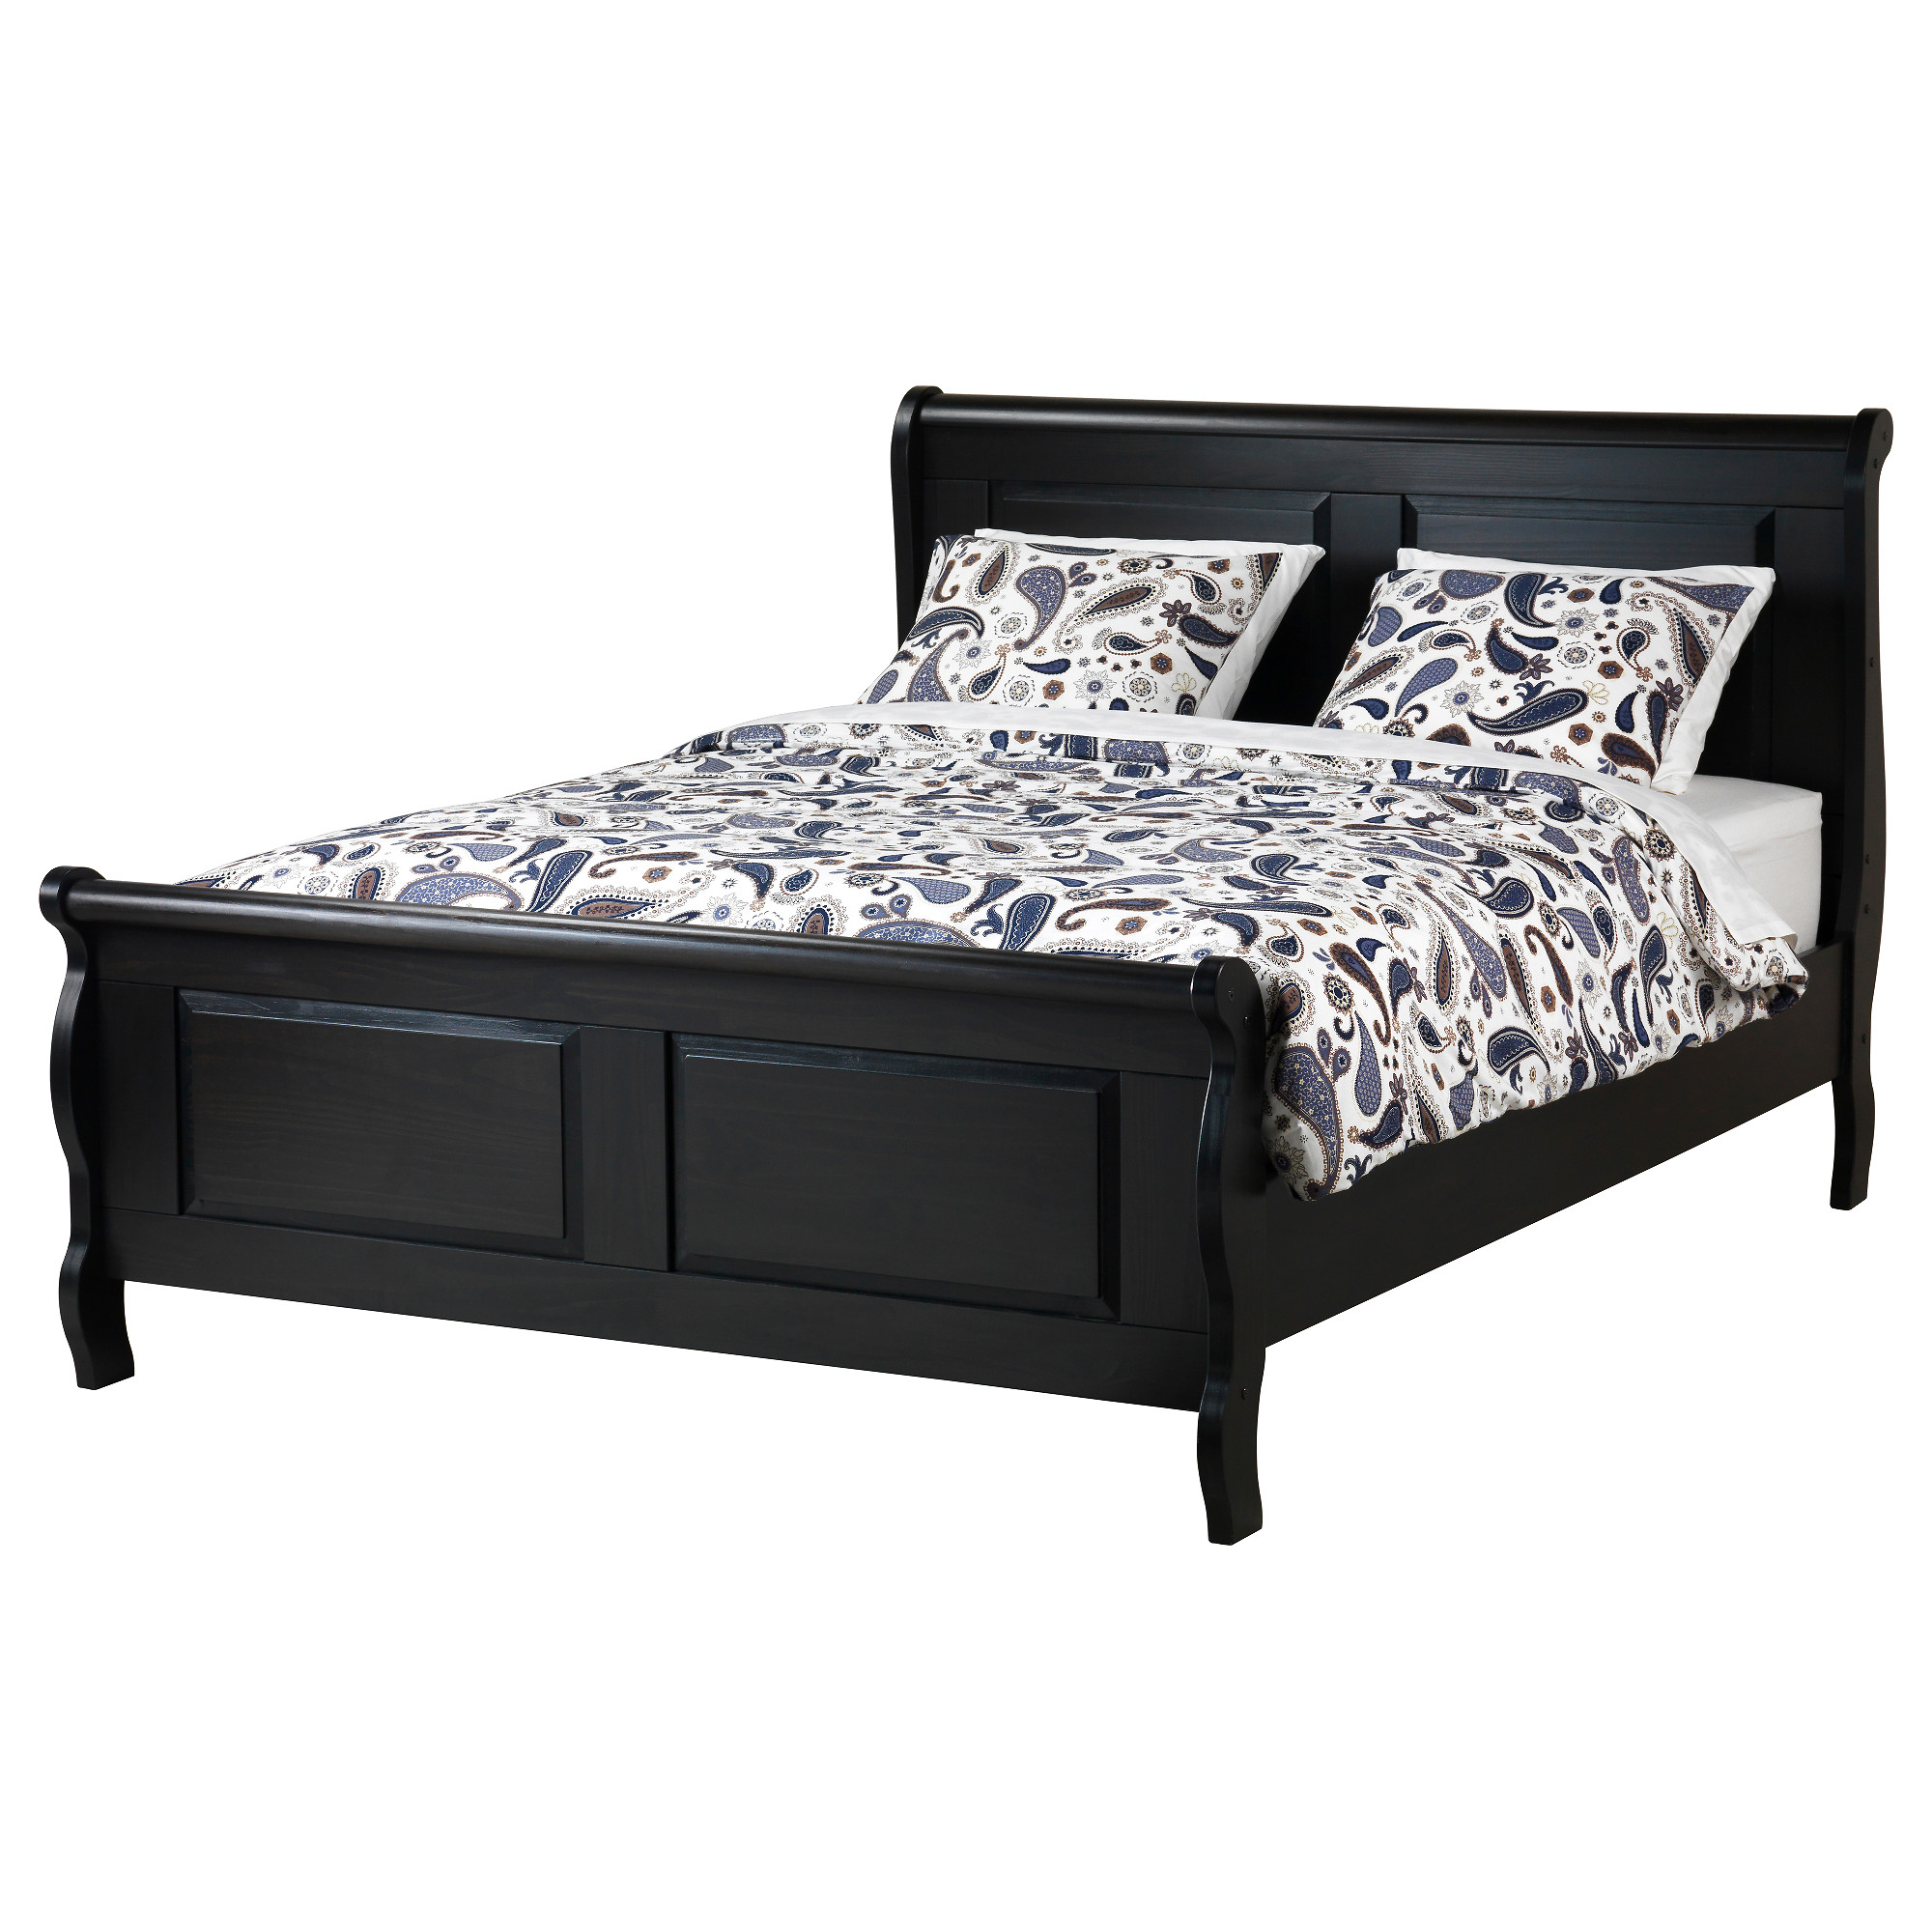 Frame Metal Queen Black Painted With Headboard And White Mattress ...